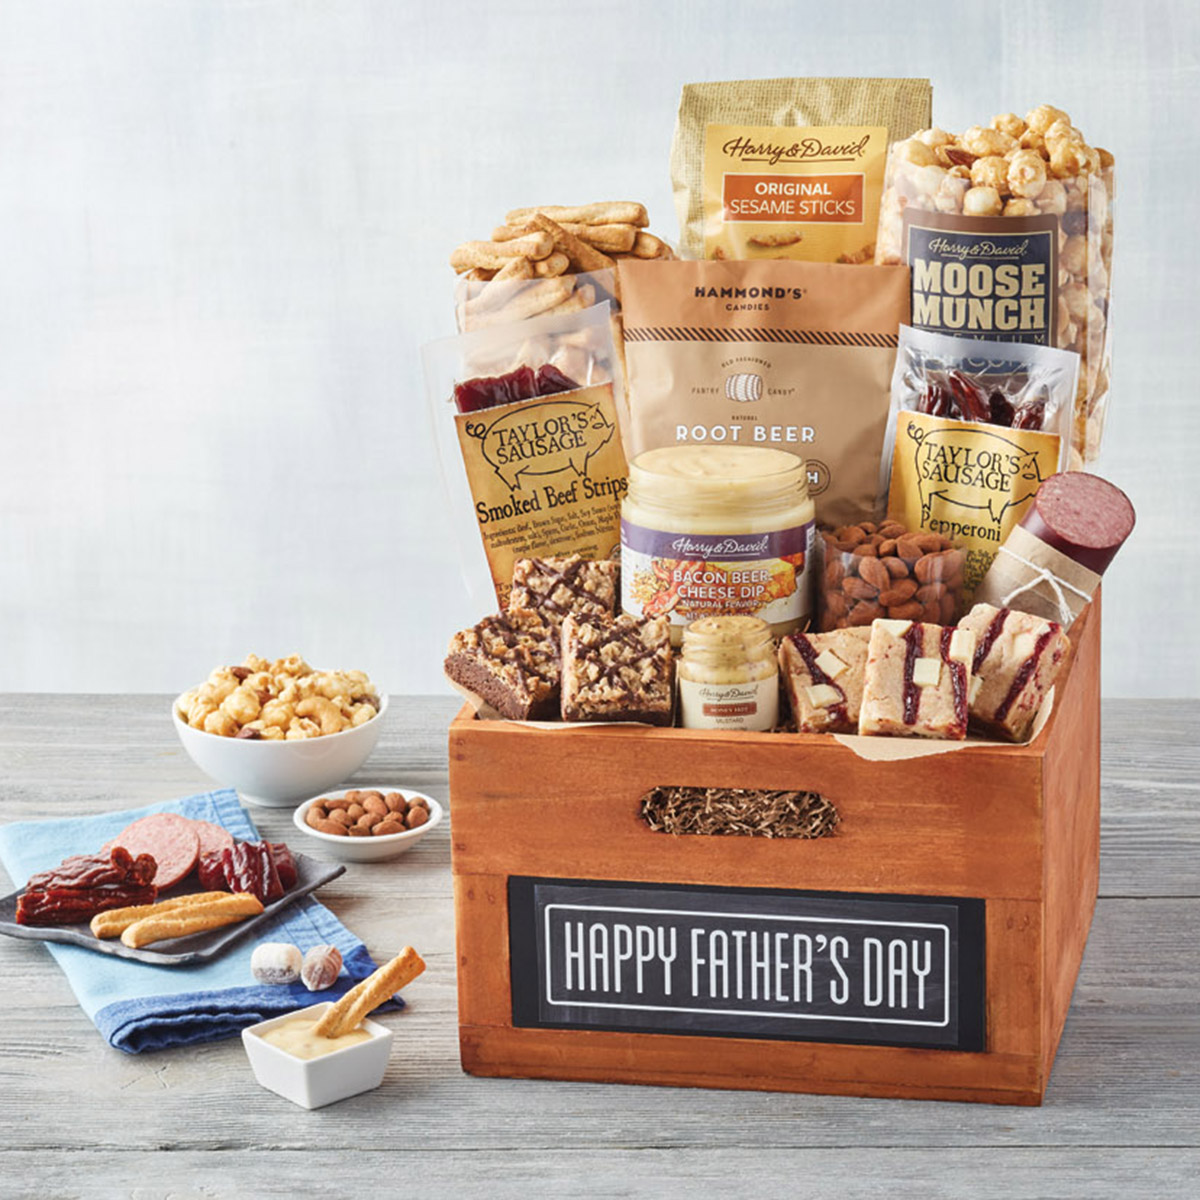 10 Delicious Father's Day Gift Ideas